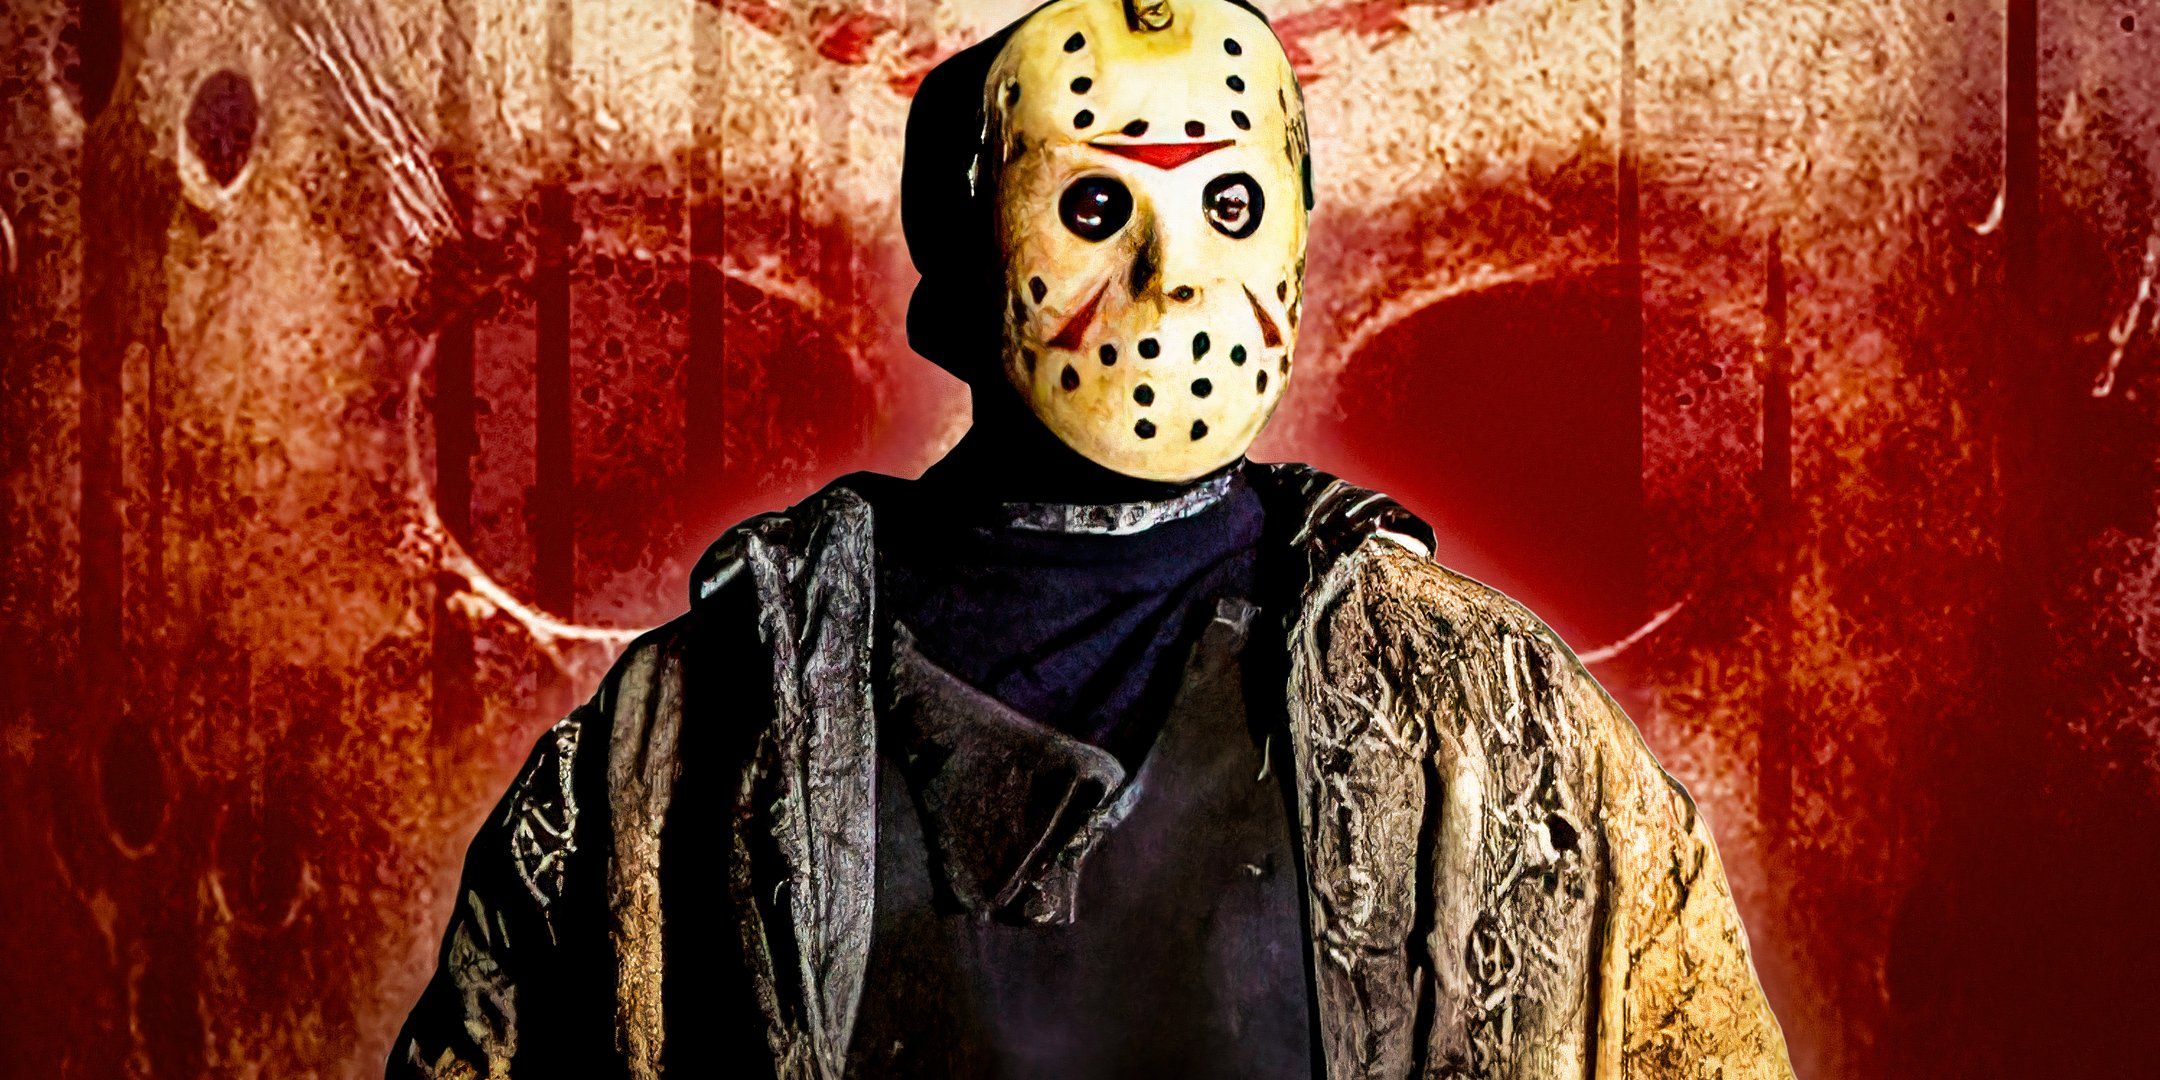 Jason-From-The-Friday-The-13th-Franchise